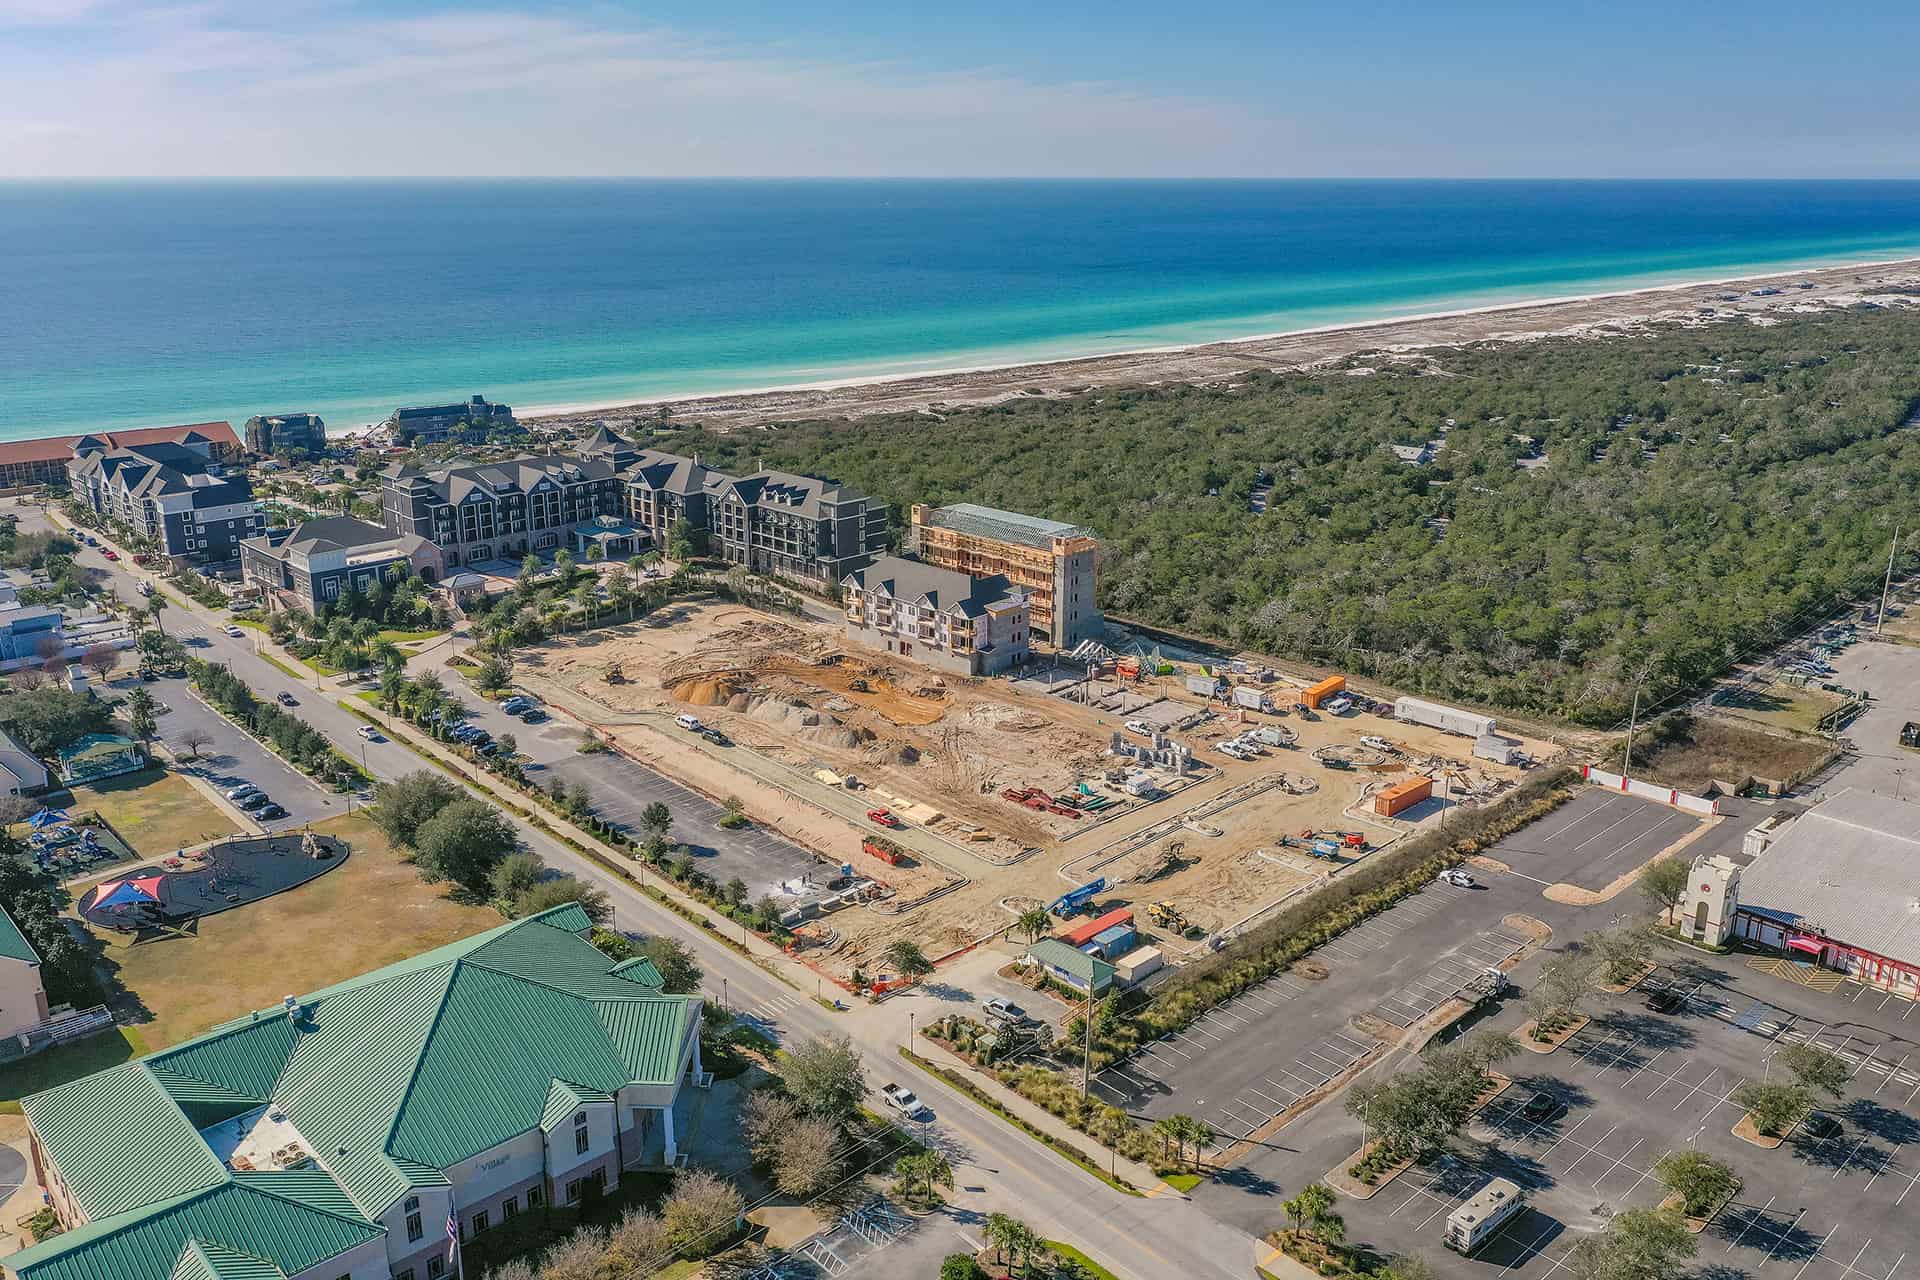 Parkside_at_Henderson_Beach_Resort_January_2021 drone photo looking southwest